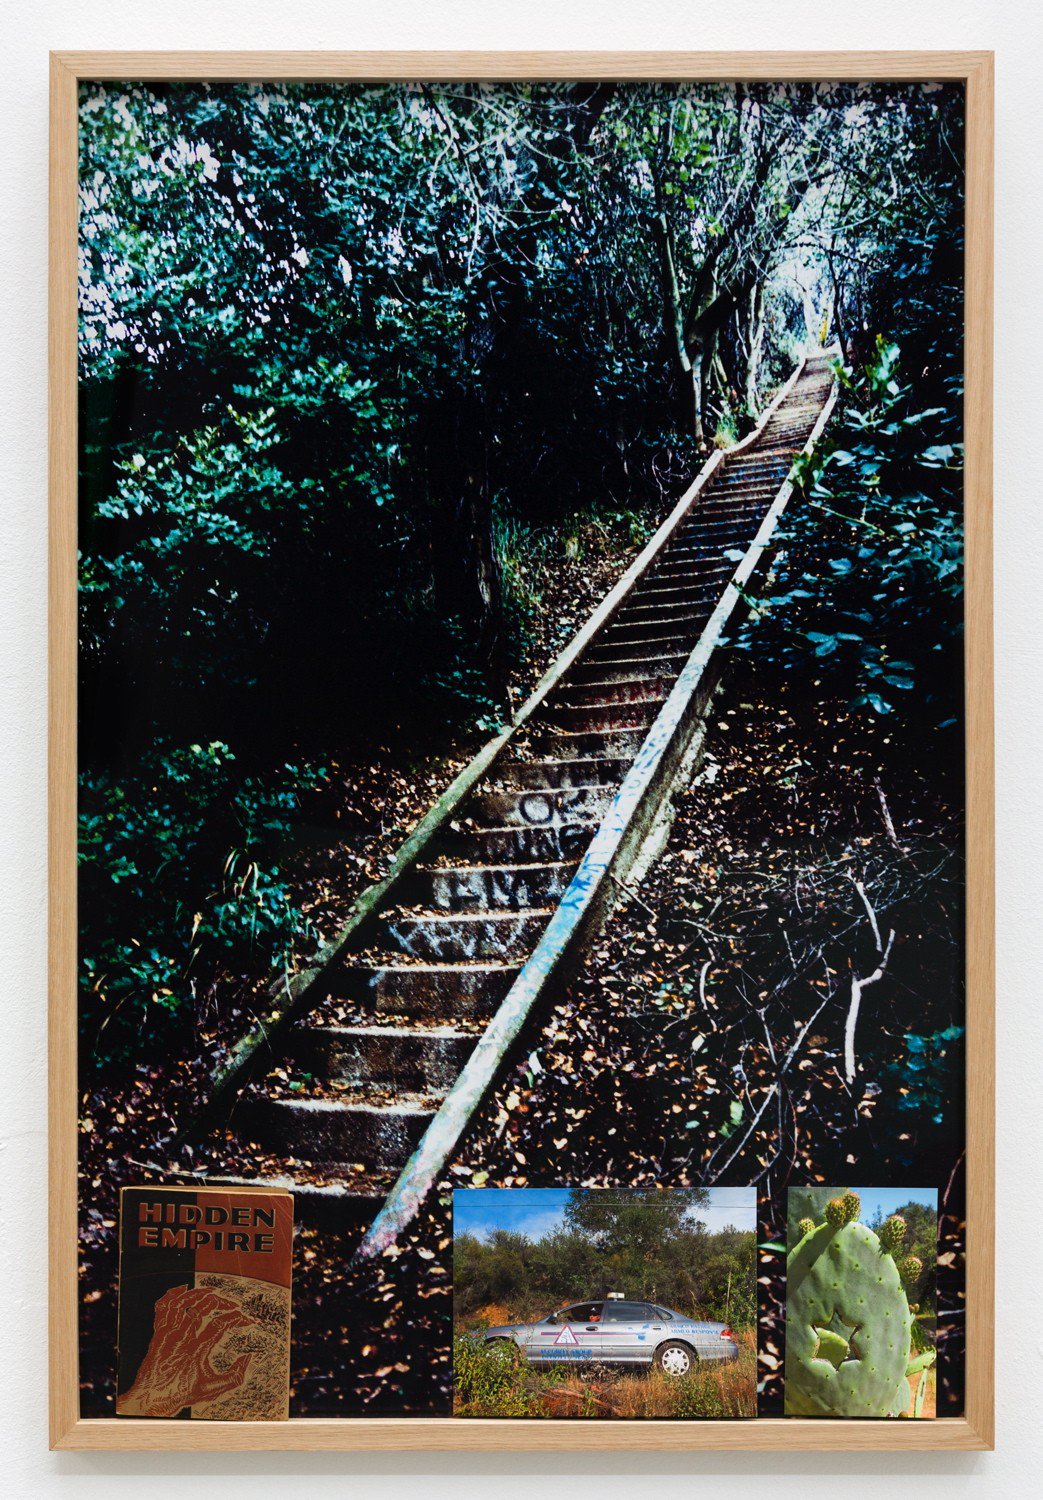 Marius Engh999 stairs, 2013Crossed analog color photograph90 x 60 cm